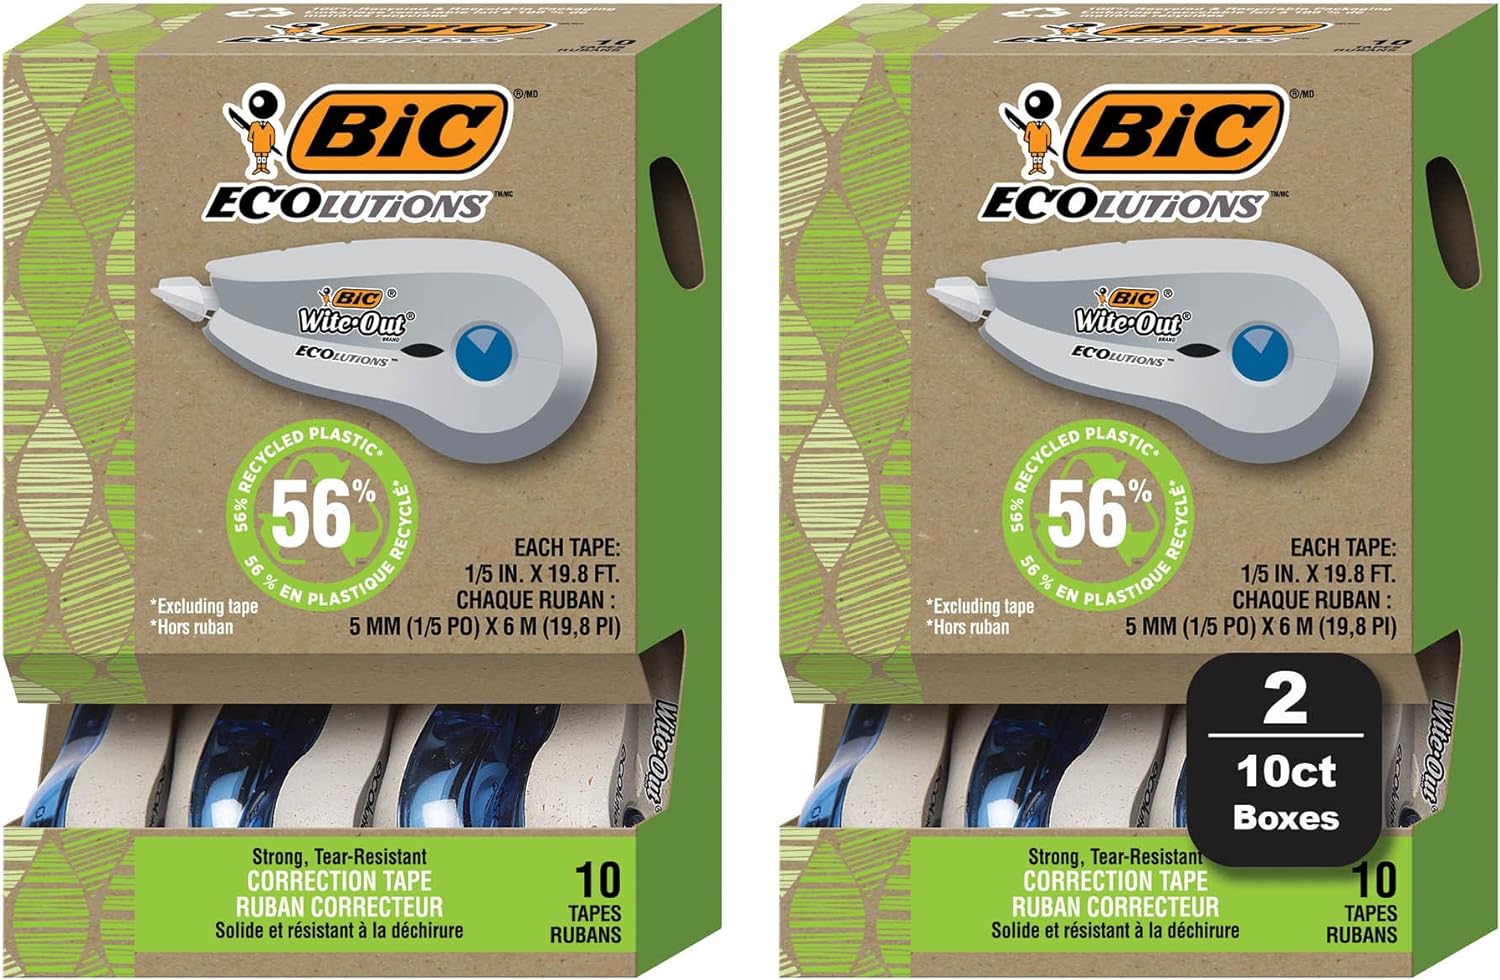 BIC Ecolutions Wite-Out Brand Correction Tape, 19.8 Feet, 20-Count Pack, Correction Tape Made from 56% Recycled Plastic Excluding Tape